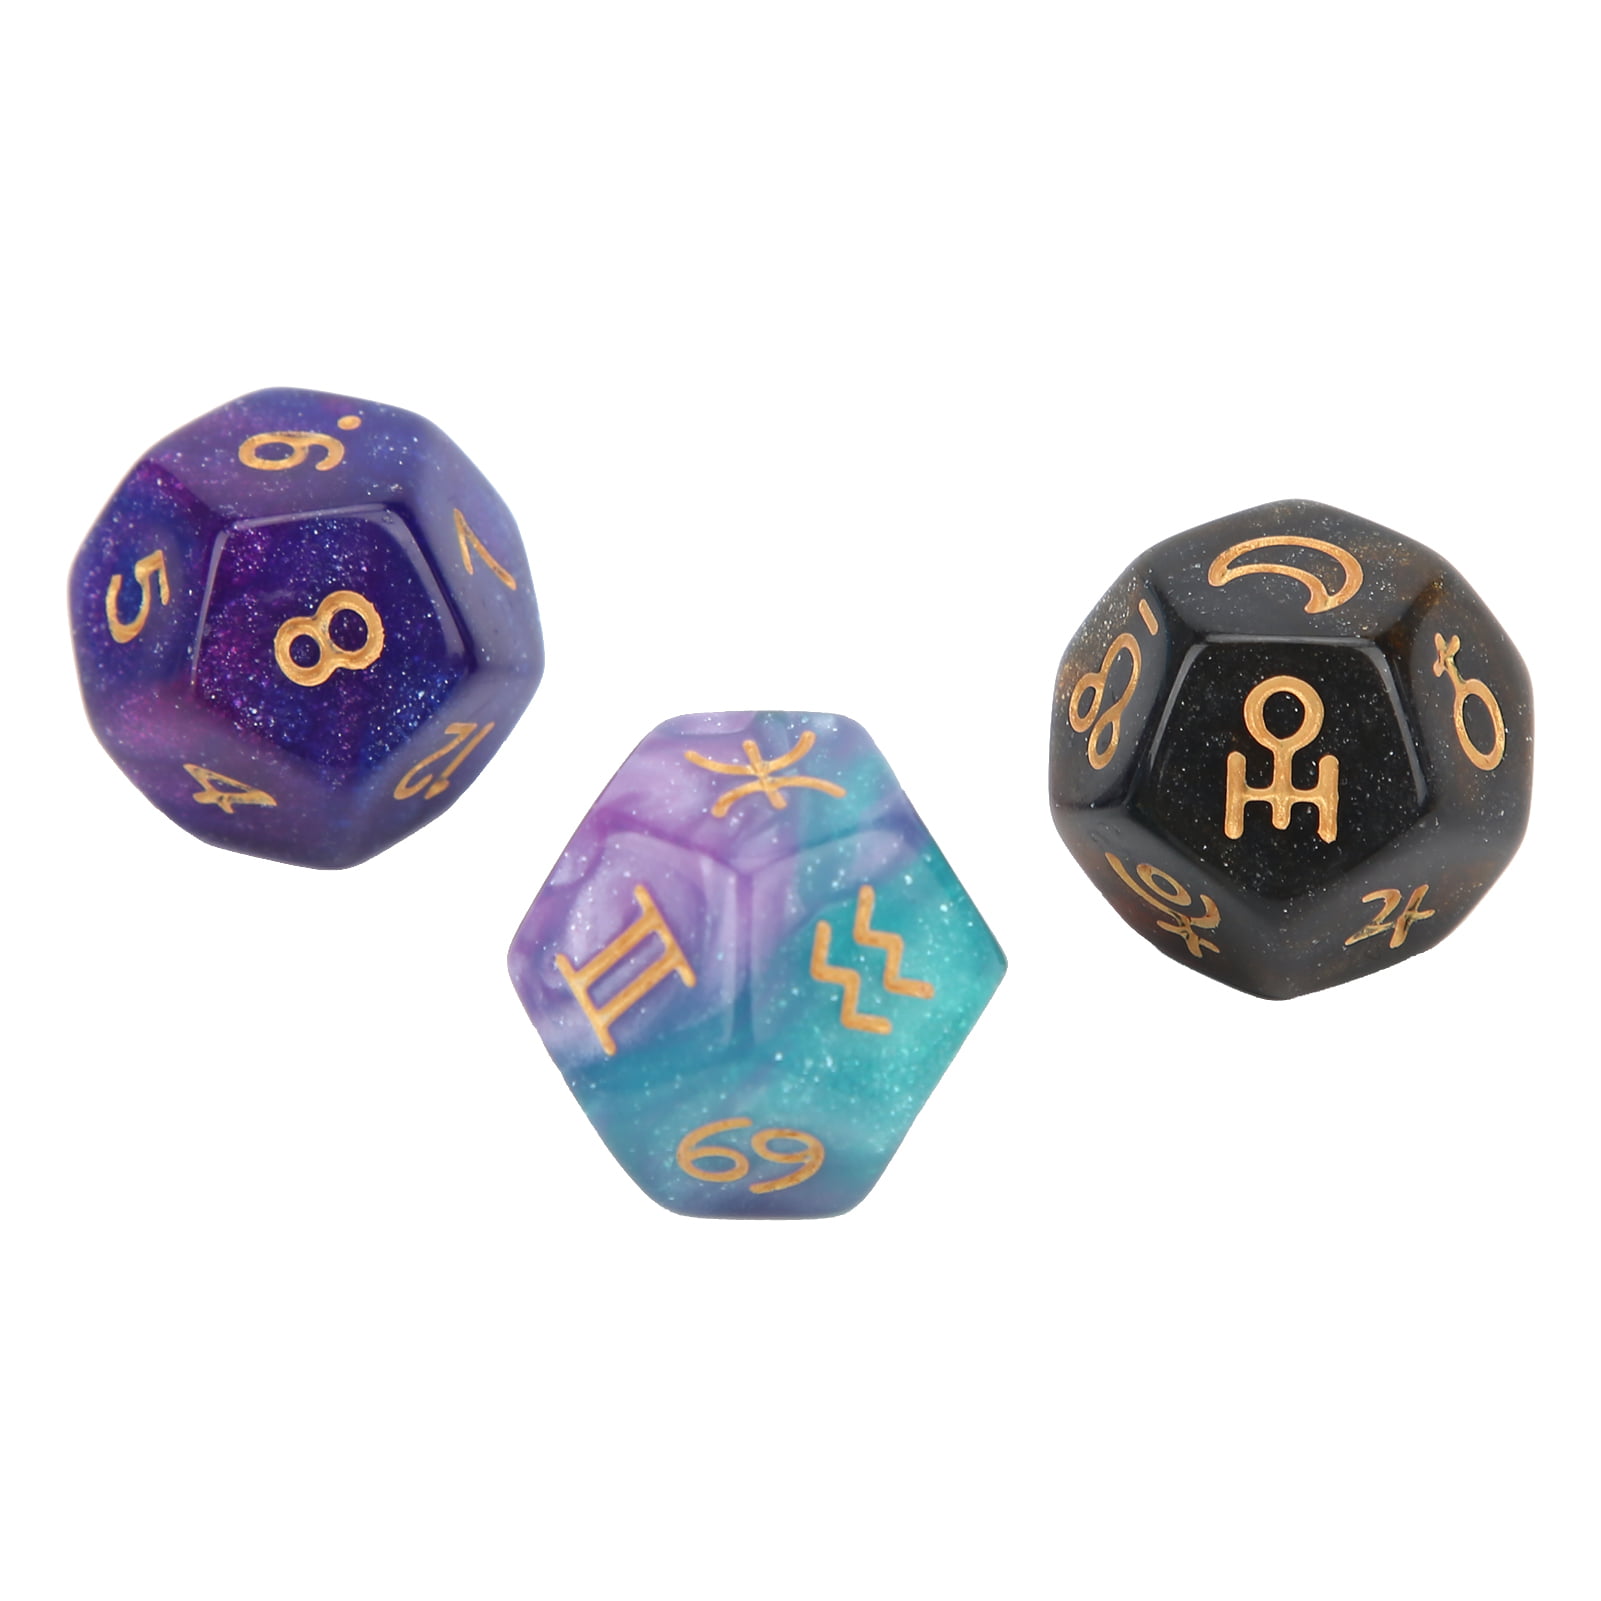 Details about   Golden Dice 20 Sides Unique Horoscope Board Game Props Bar Party Toys. 